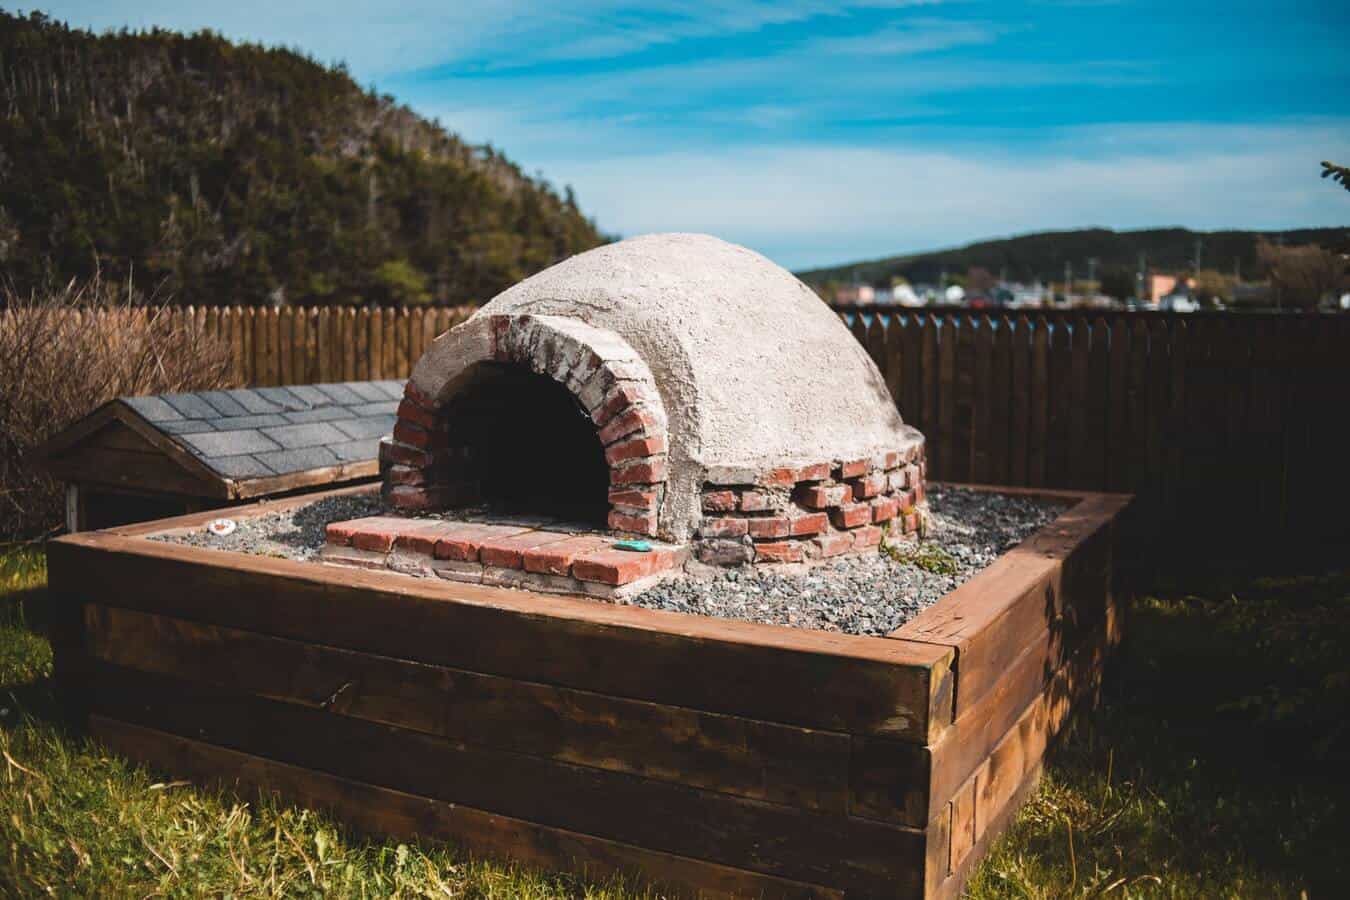 How To Build An Outdoor DIY Pizza Oven